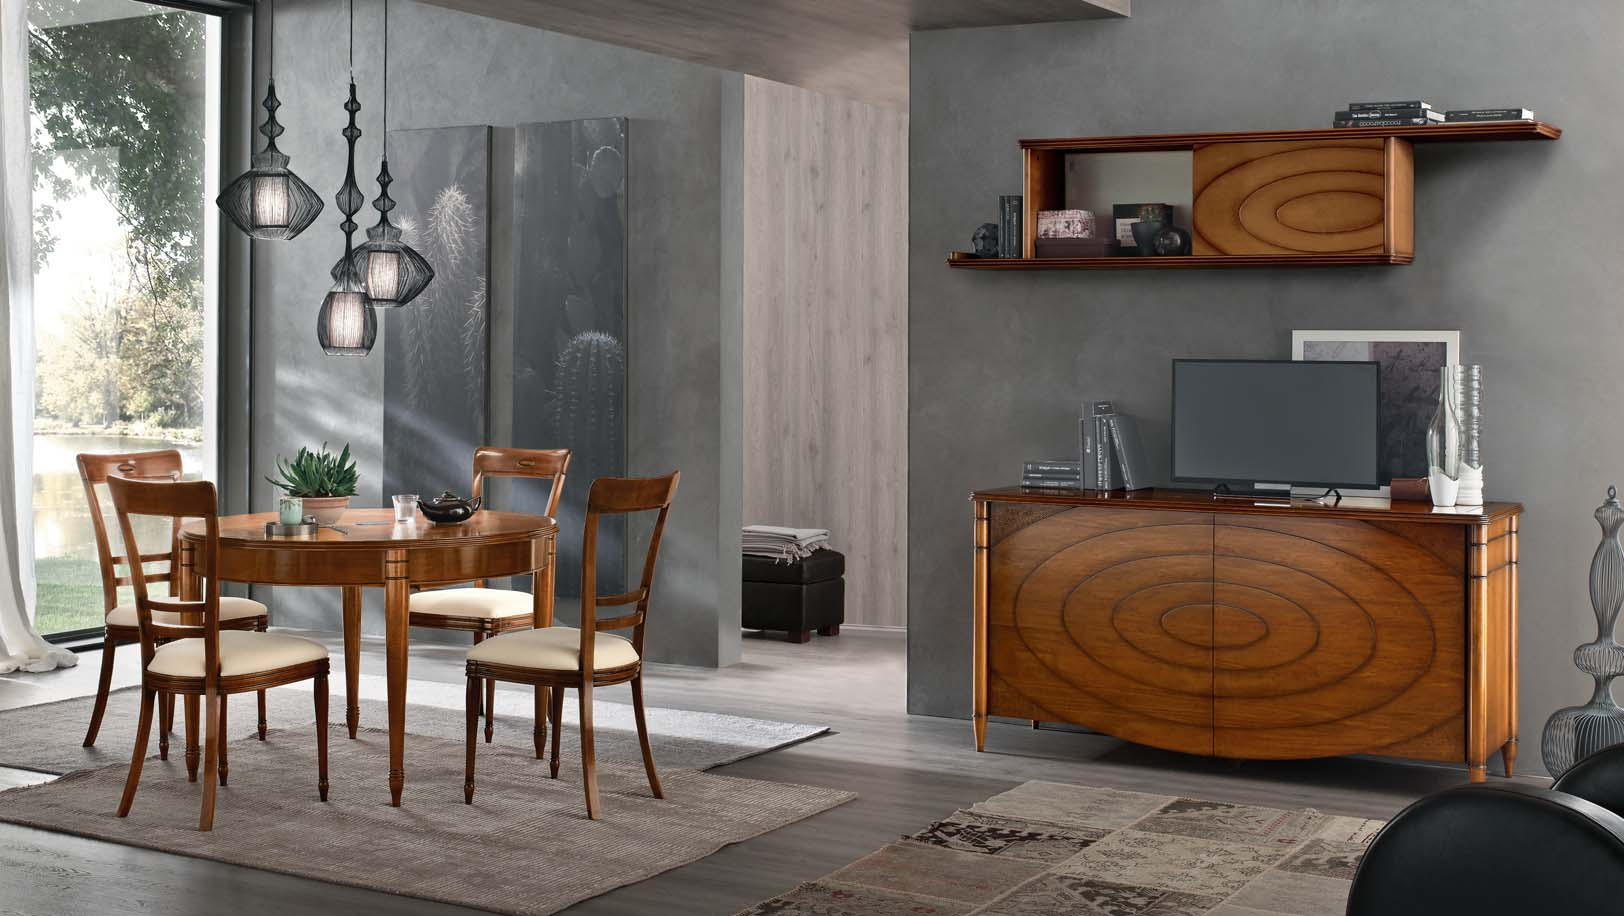 40 N 1 collection N1P3 PENSILE CON ANTA SCORREVOLE / WALL UNIT WITH SLIDING DOOR. FINITURA / FINISH: AMBRA. N122 CREDENZA CON DUE ANTE A BATTENTE / DRESSER WITH TWO DOORS.